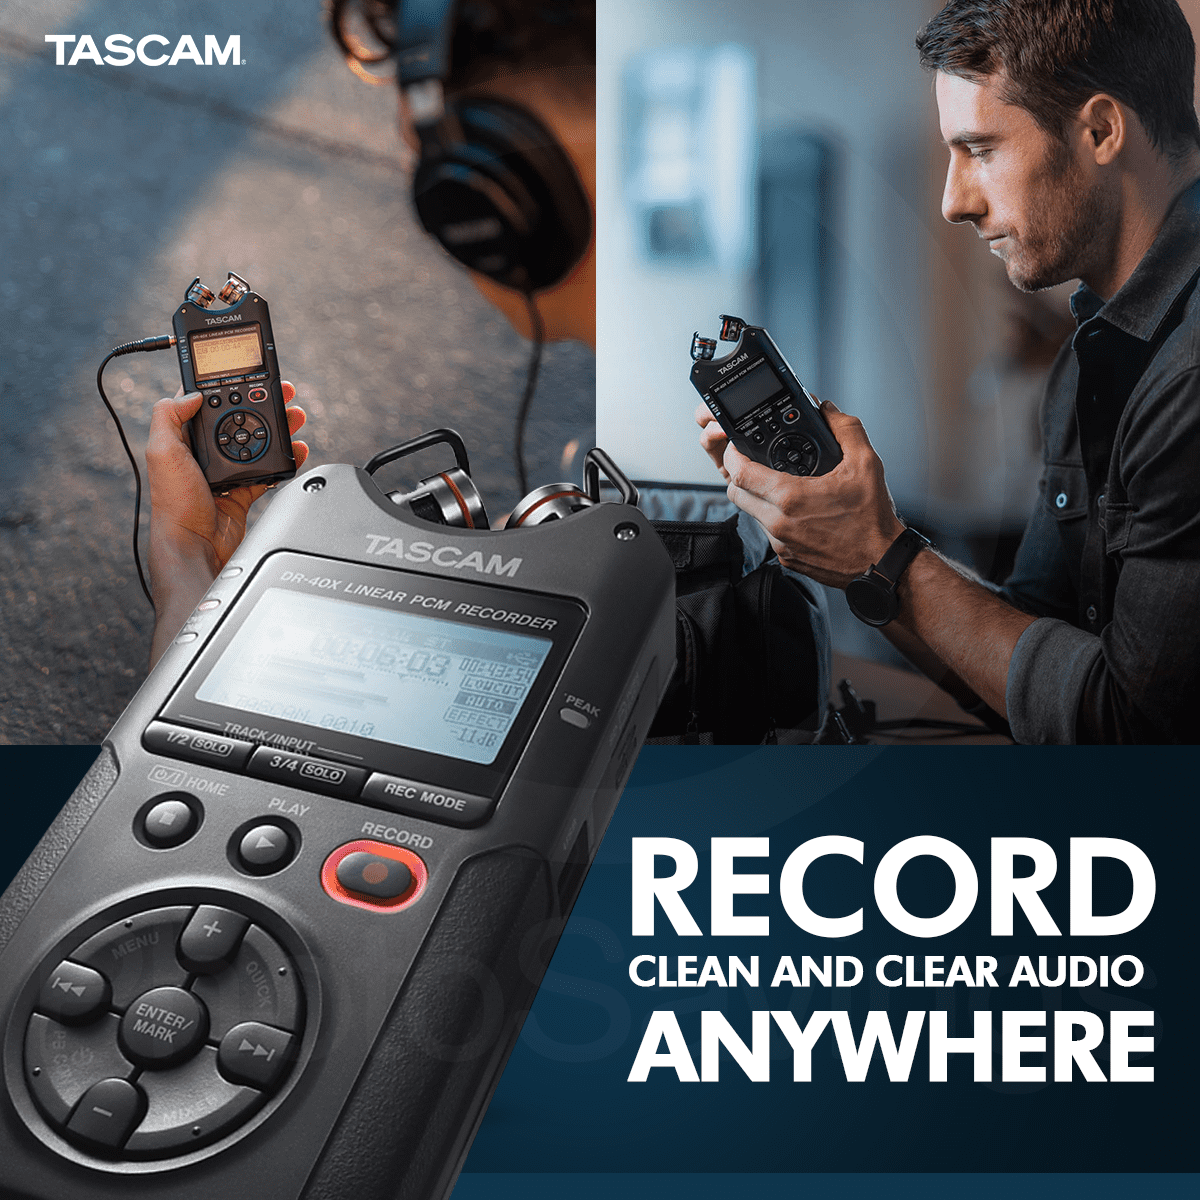 Tascam DRX Four Track Digital Audio Recorder and USB Audio